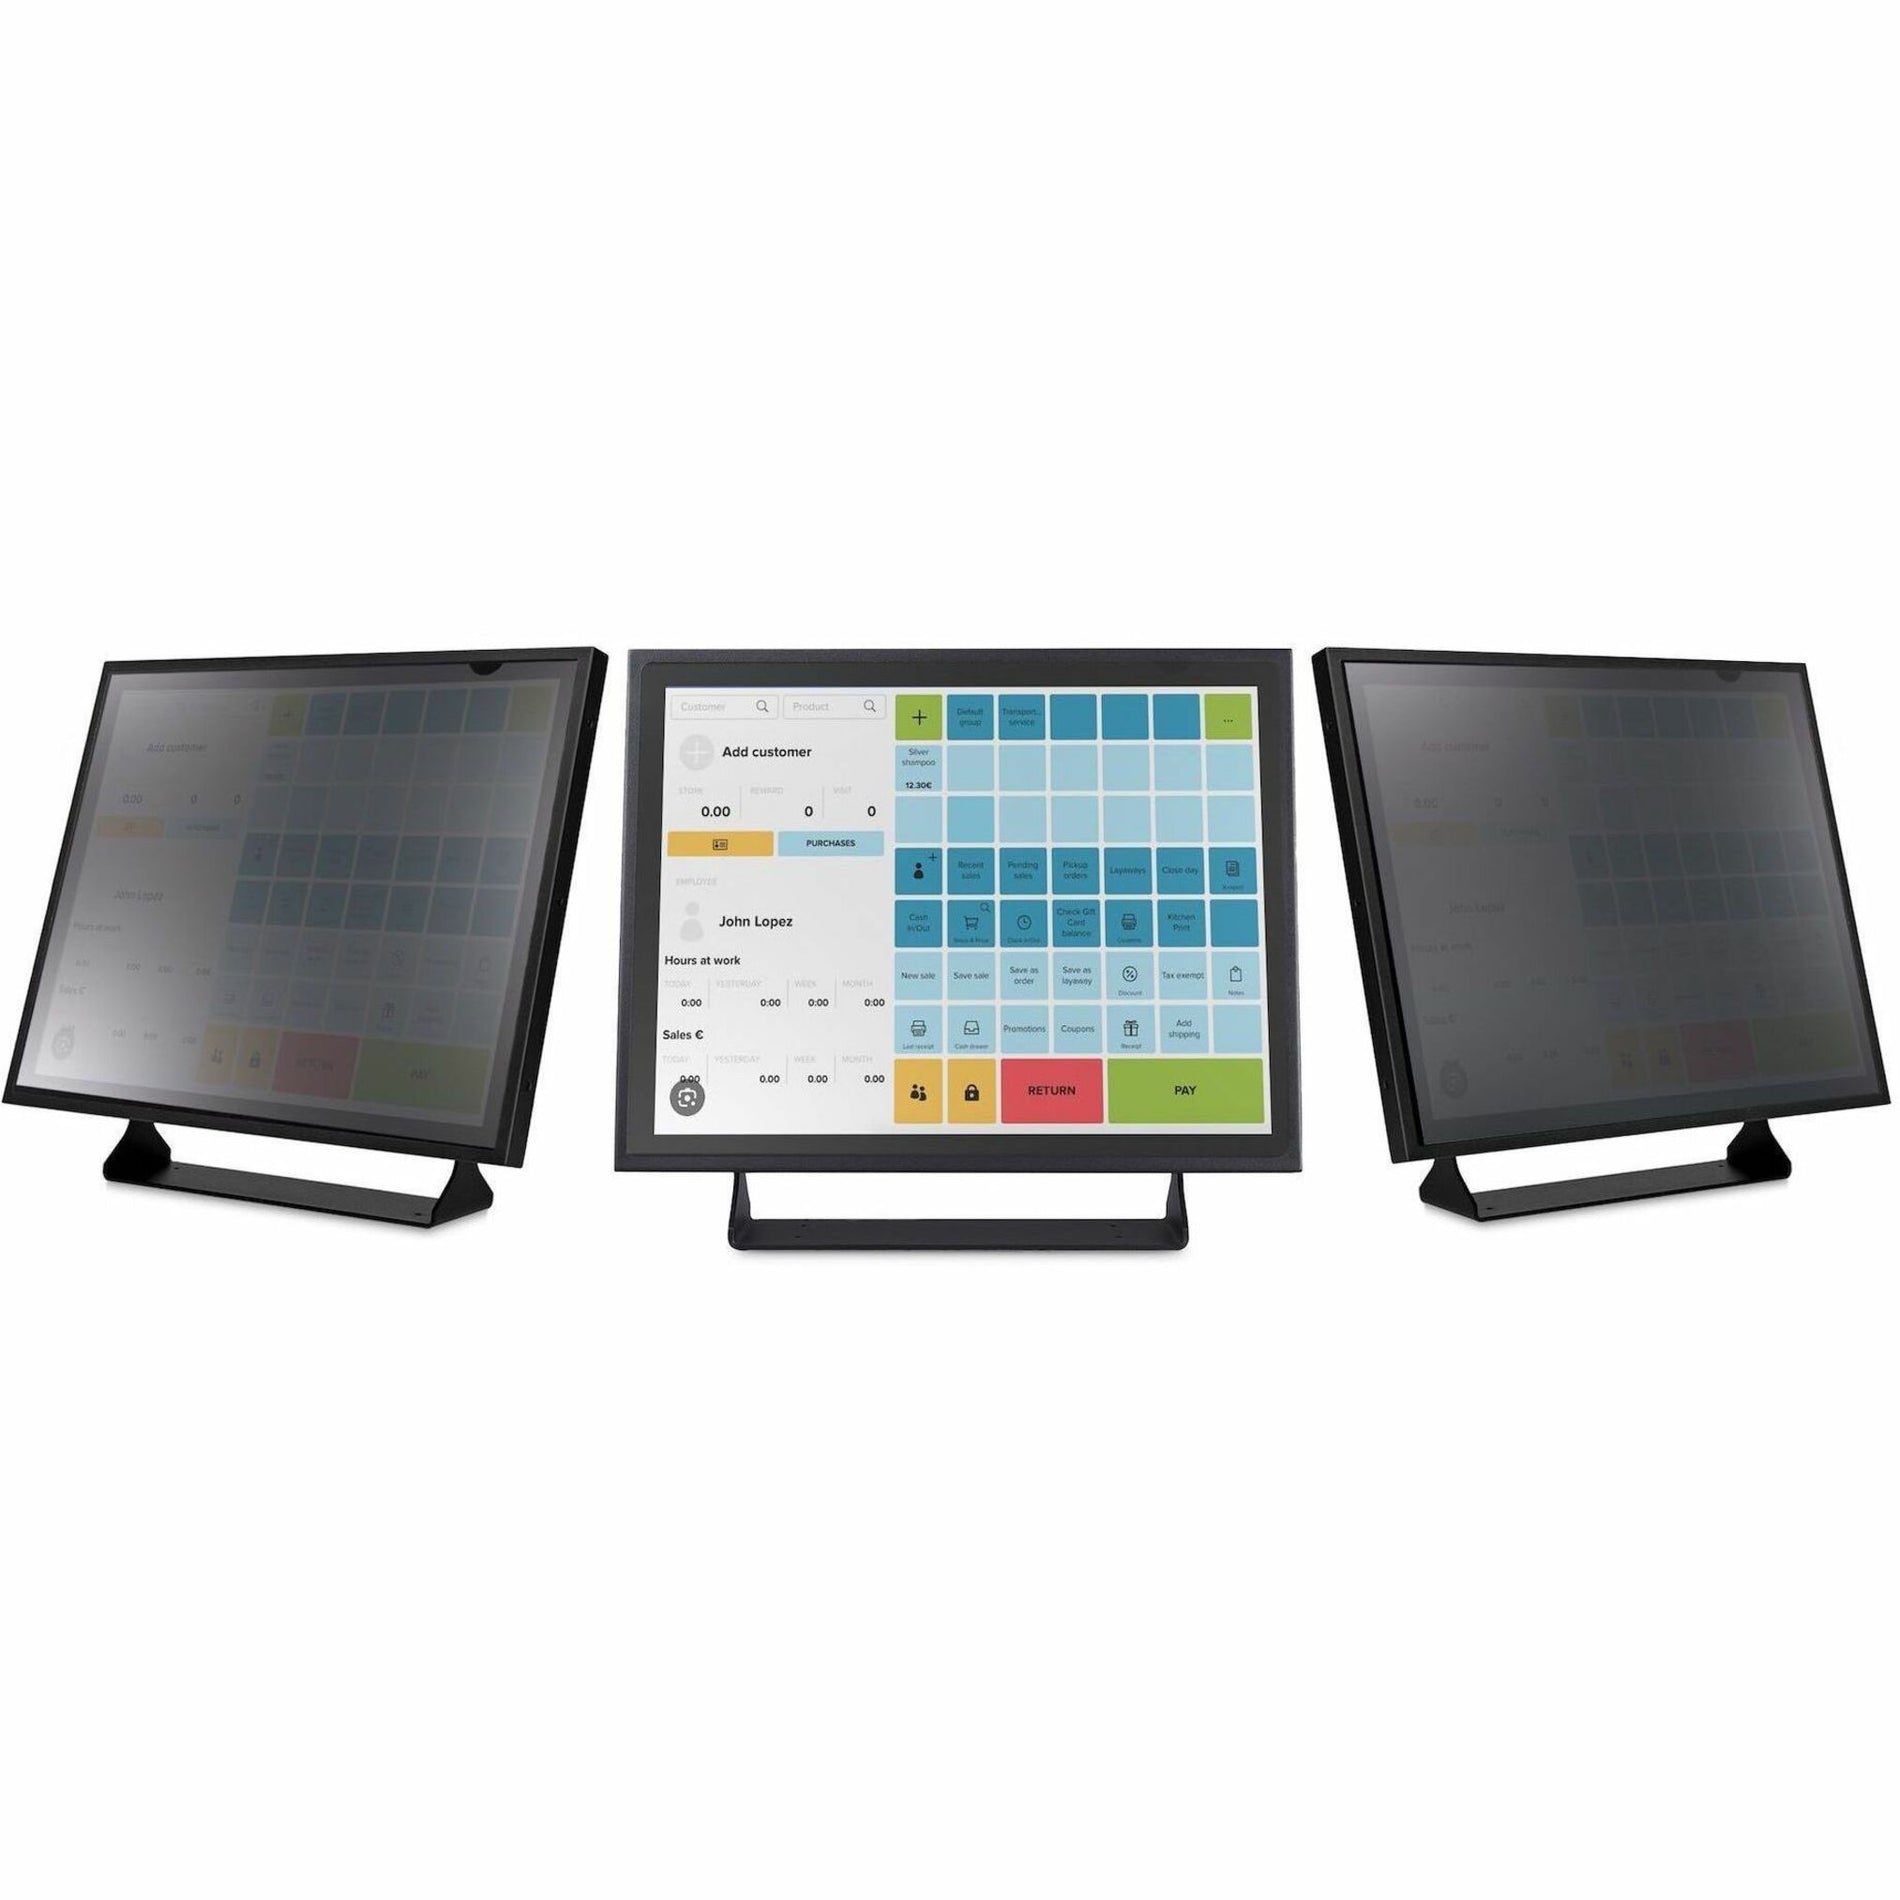 StarTech.com 1954-PRIVACY-SCREEN Privacy Screen Protector, Blue Light Reduction, Reversible, Residue-free, Anti-glare, 5:4 Aspect Ratio, 19" LCD Monitor